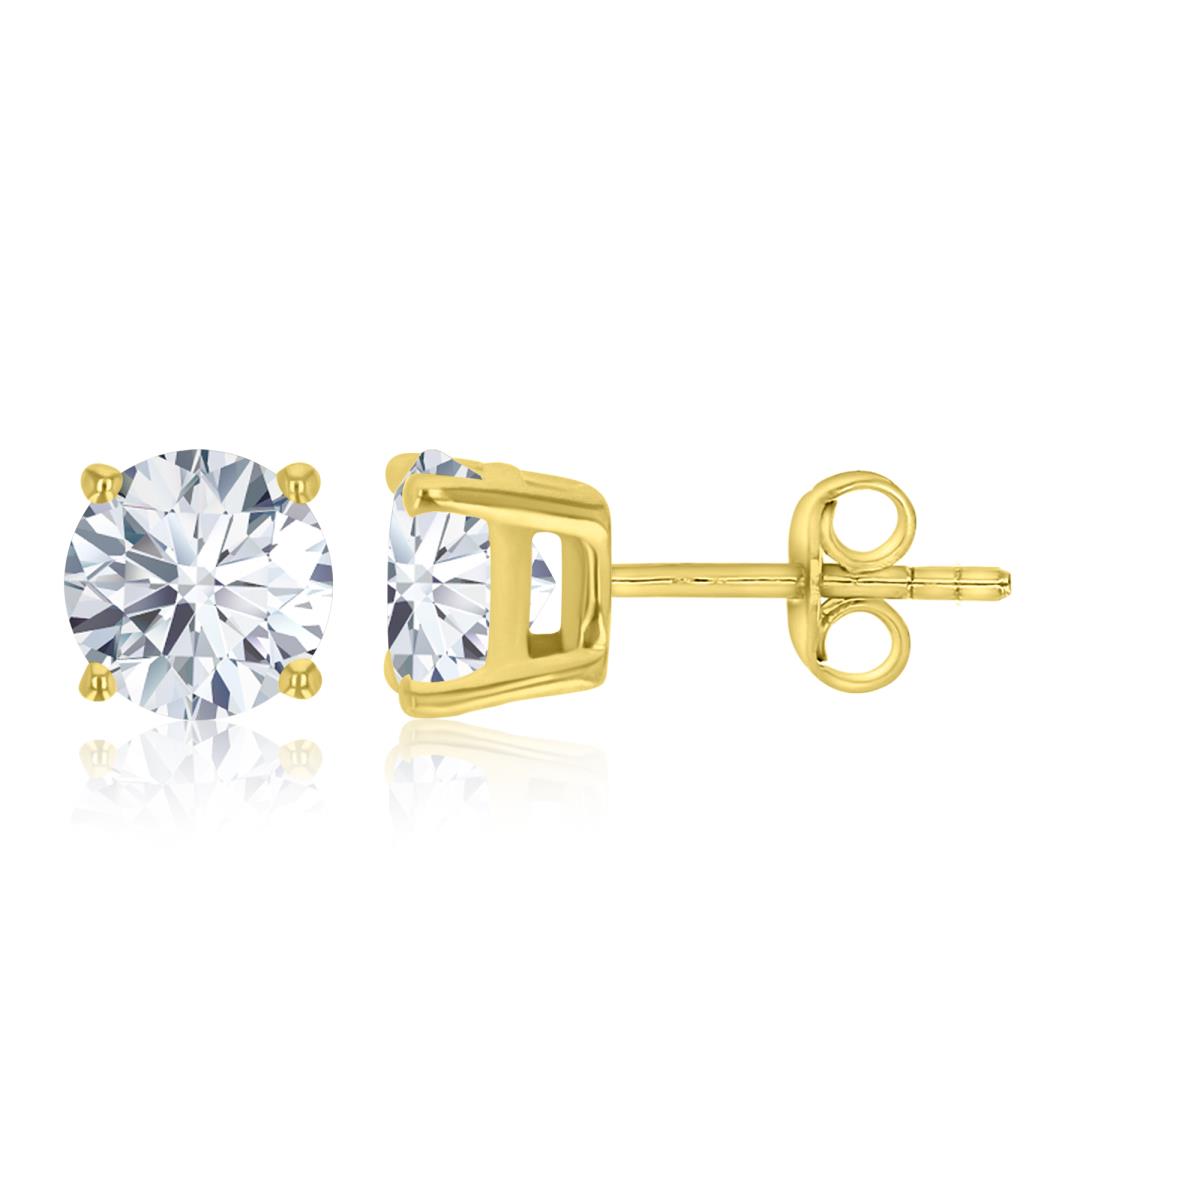 14K Yellow Gold 5mm Round Stud Earring